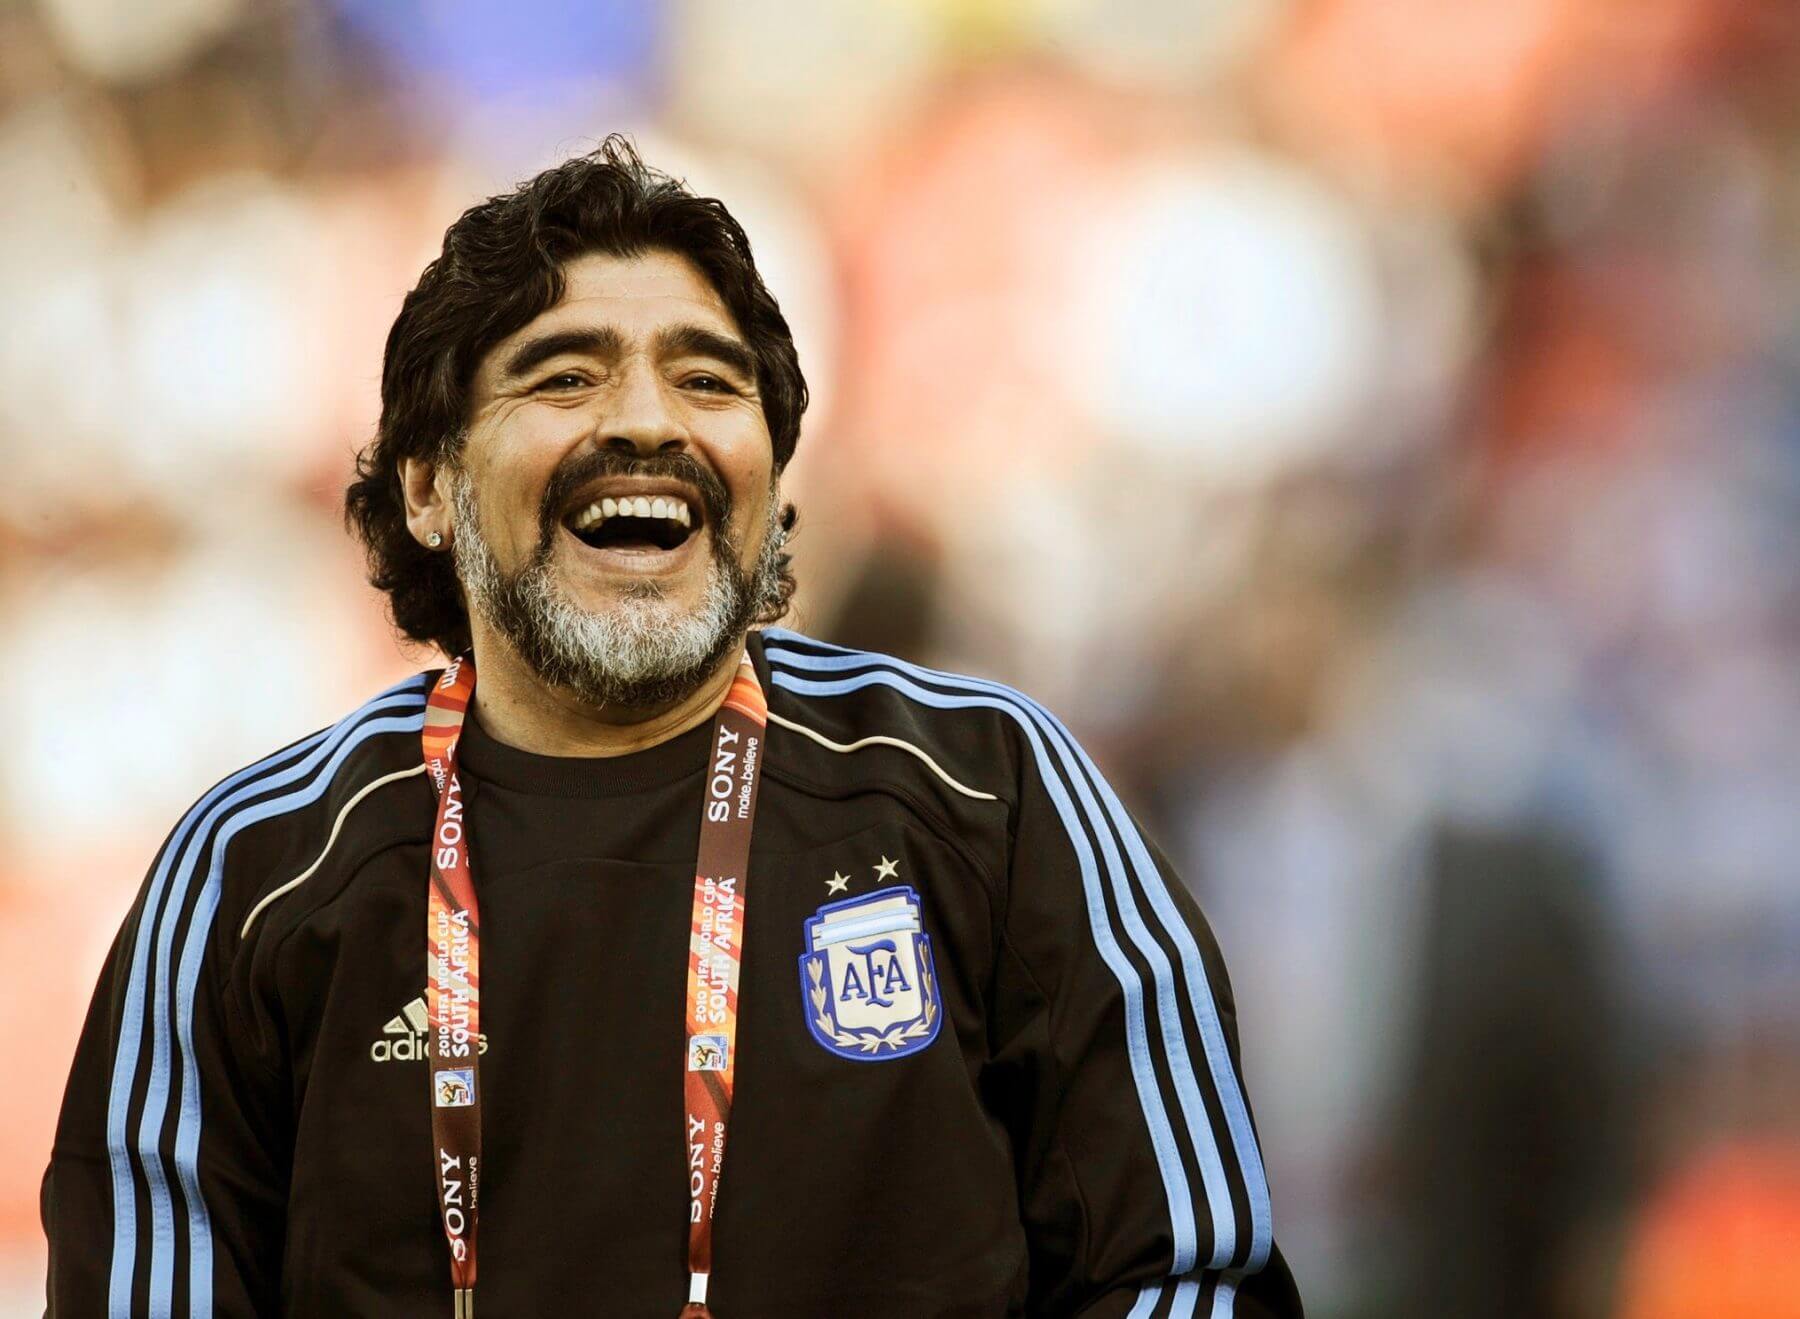 Diego Maradona Biography - Age, Net Worth & 20 Facts About Him - 360dopes